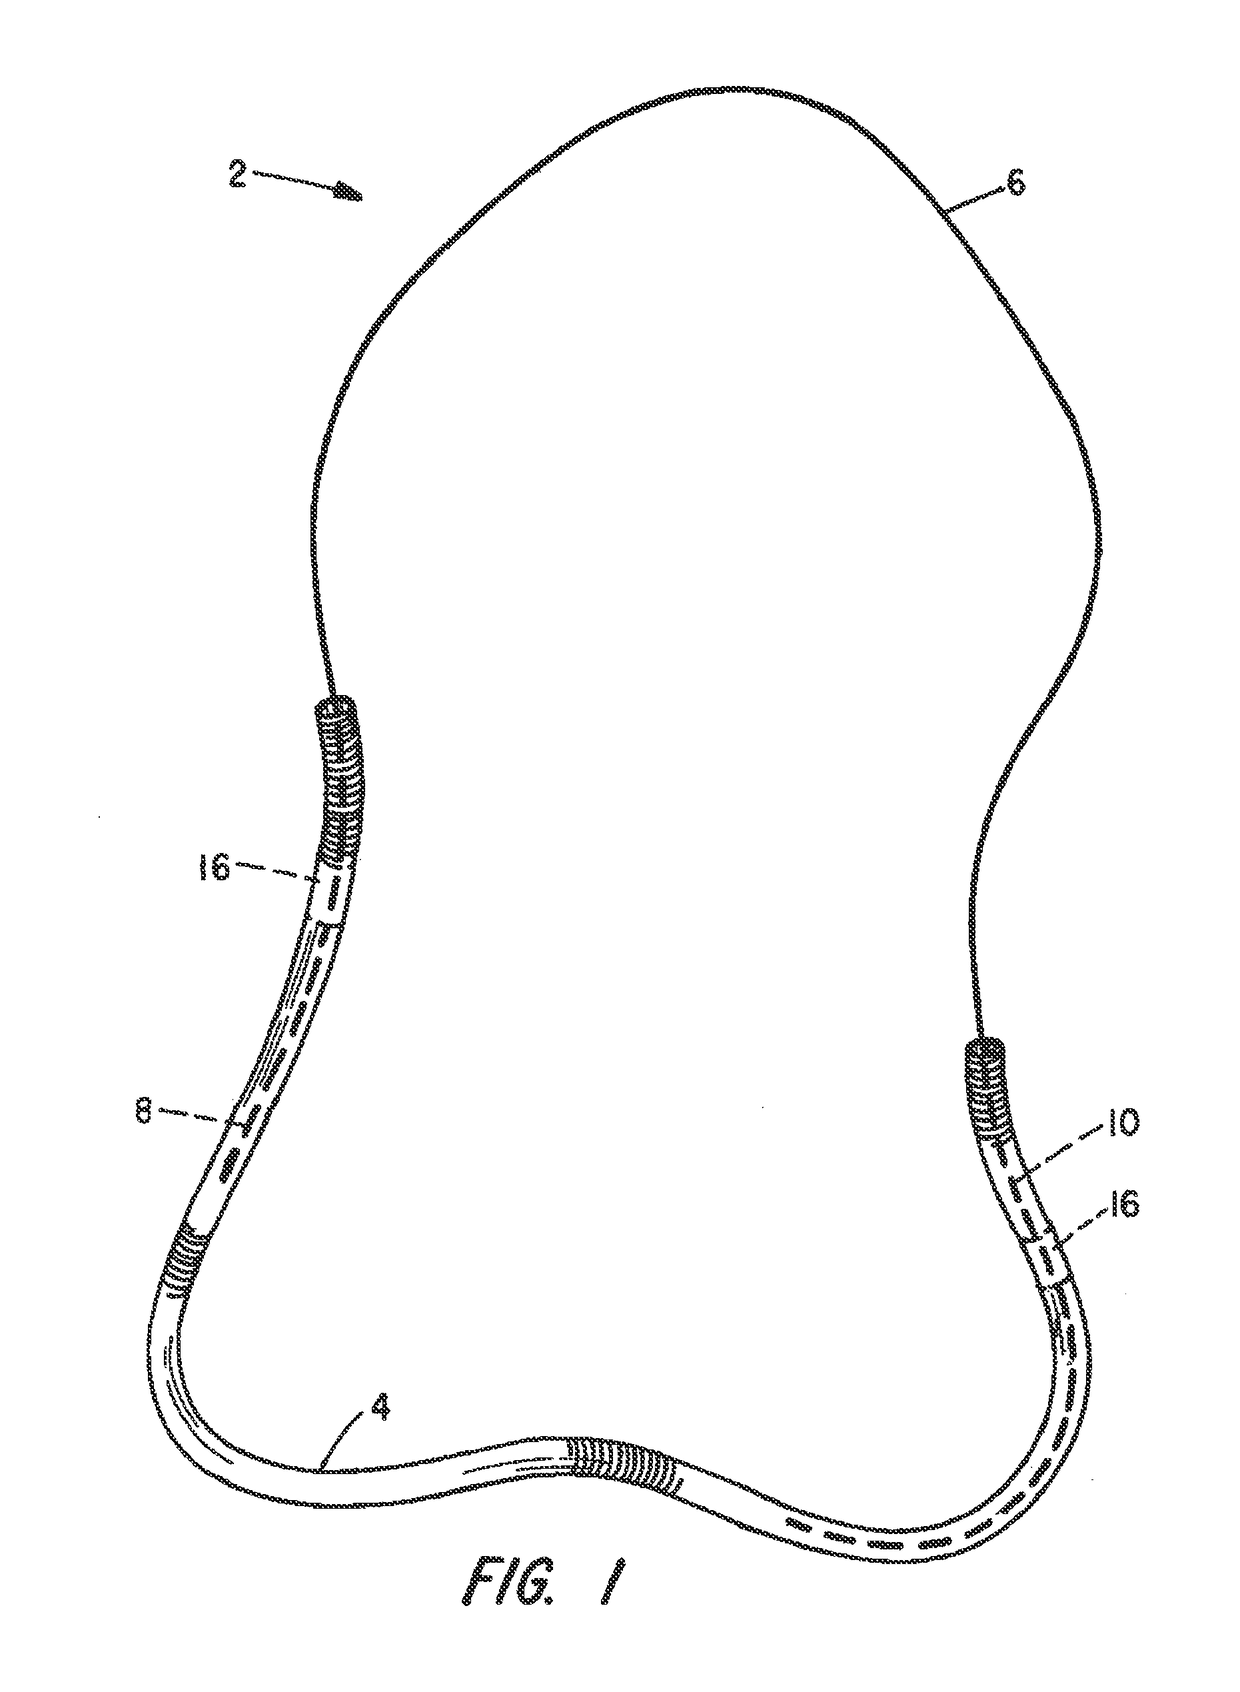 Hernia patch frame incorporating bio-absorbable material